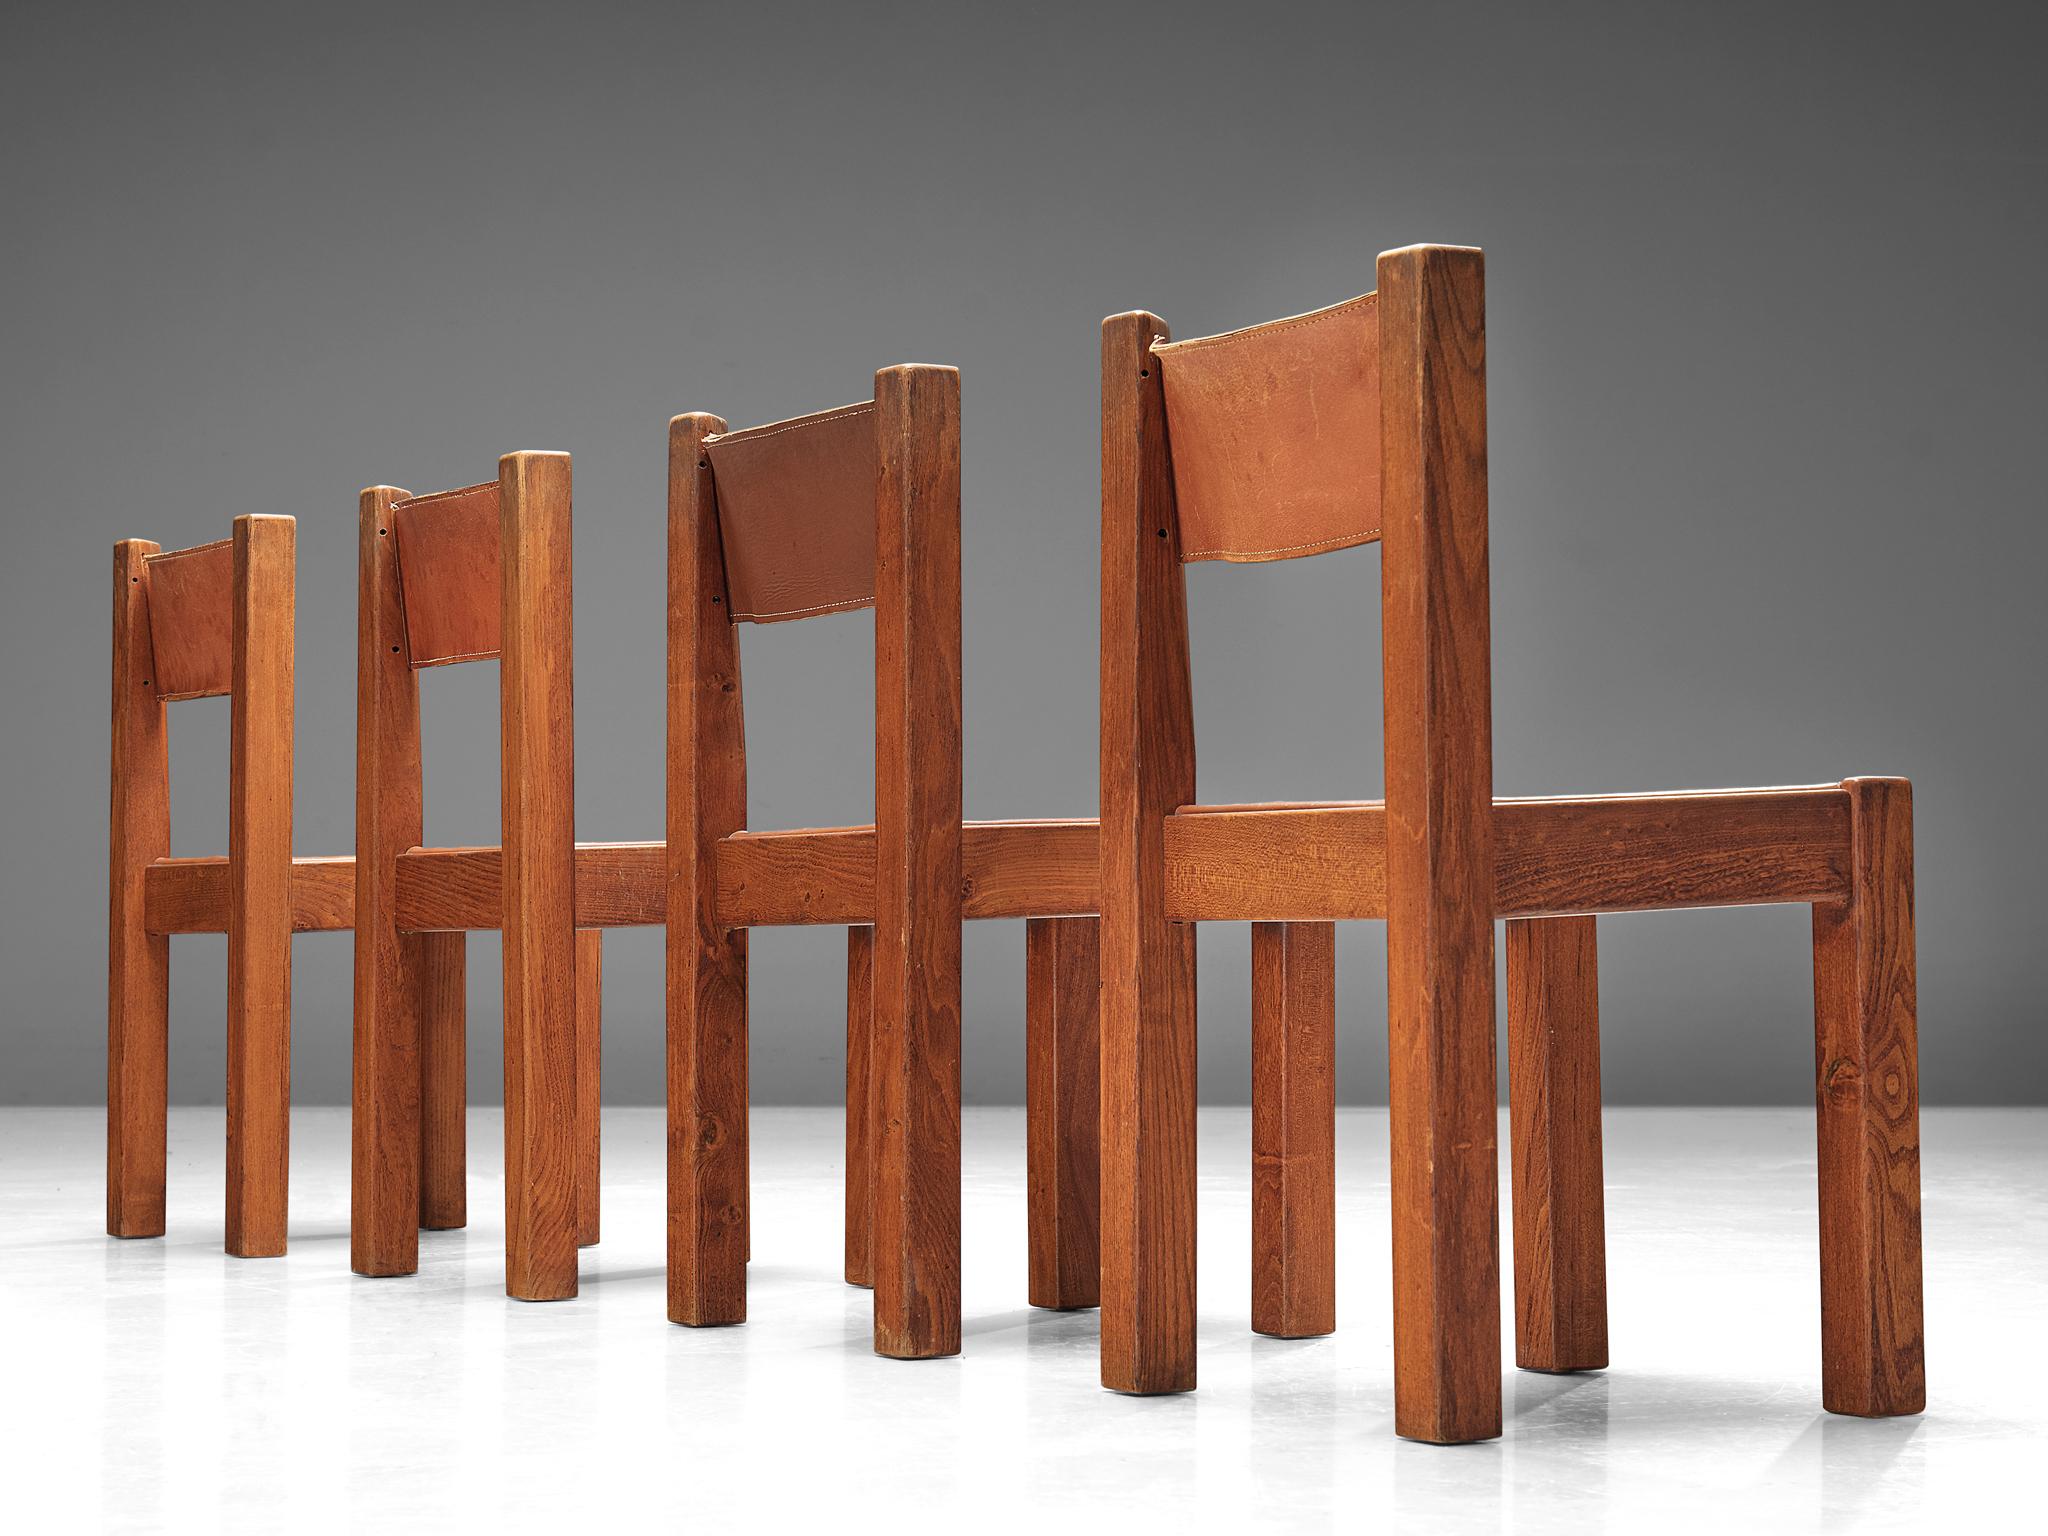 Set of four dining chairs, oak and cognac leather, France, 1960. 

A set of four chairs in solid oak with cognac saddle leather seating and back. These chairs have a geometric design that is strong in its simplicity. The color of the cognac leather